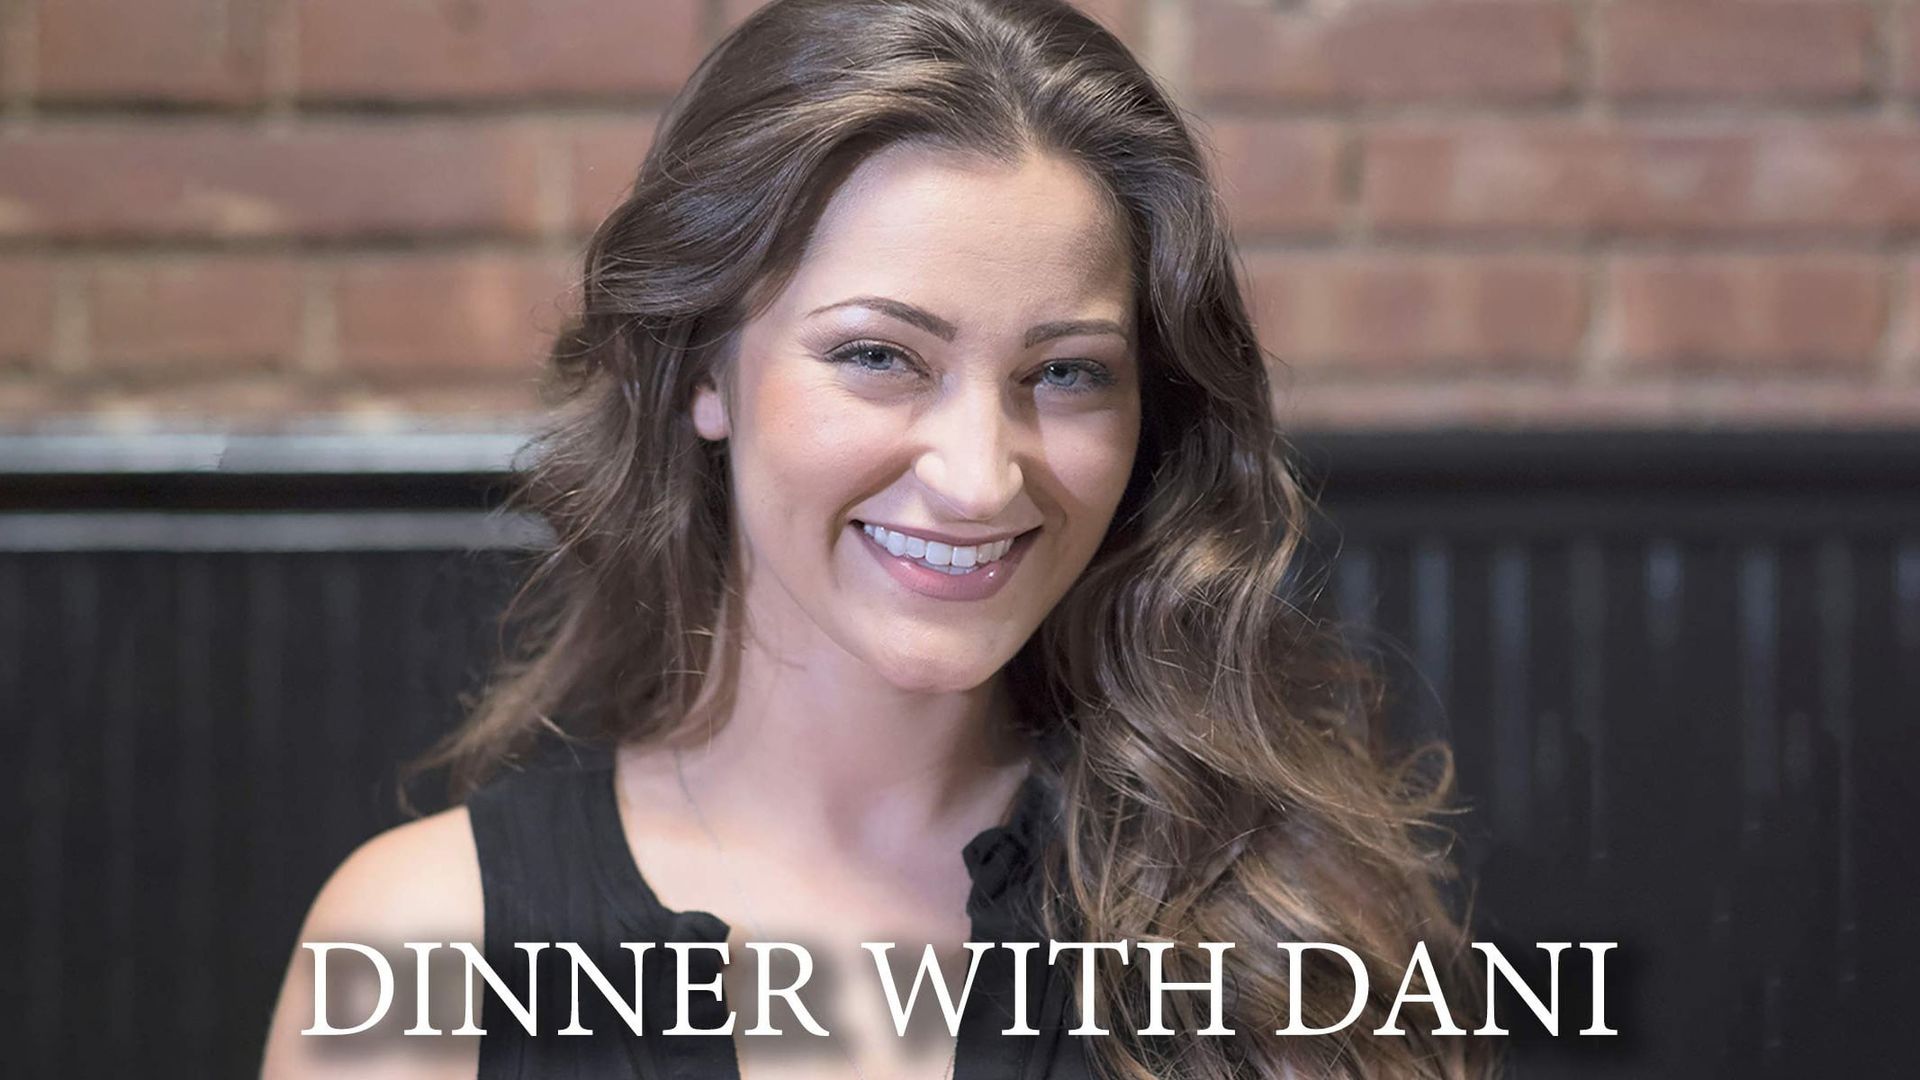 Dinner with Dani - Where to Watch Every Episode Streaming Online | Reelgood